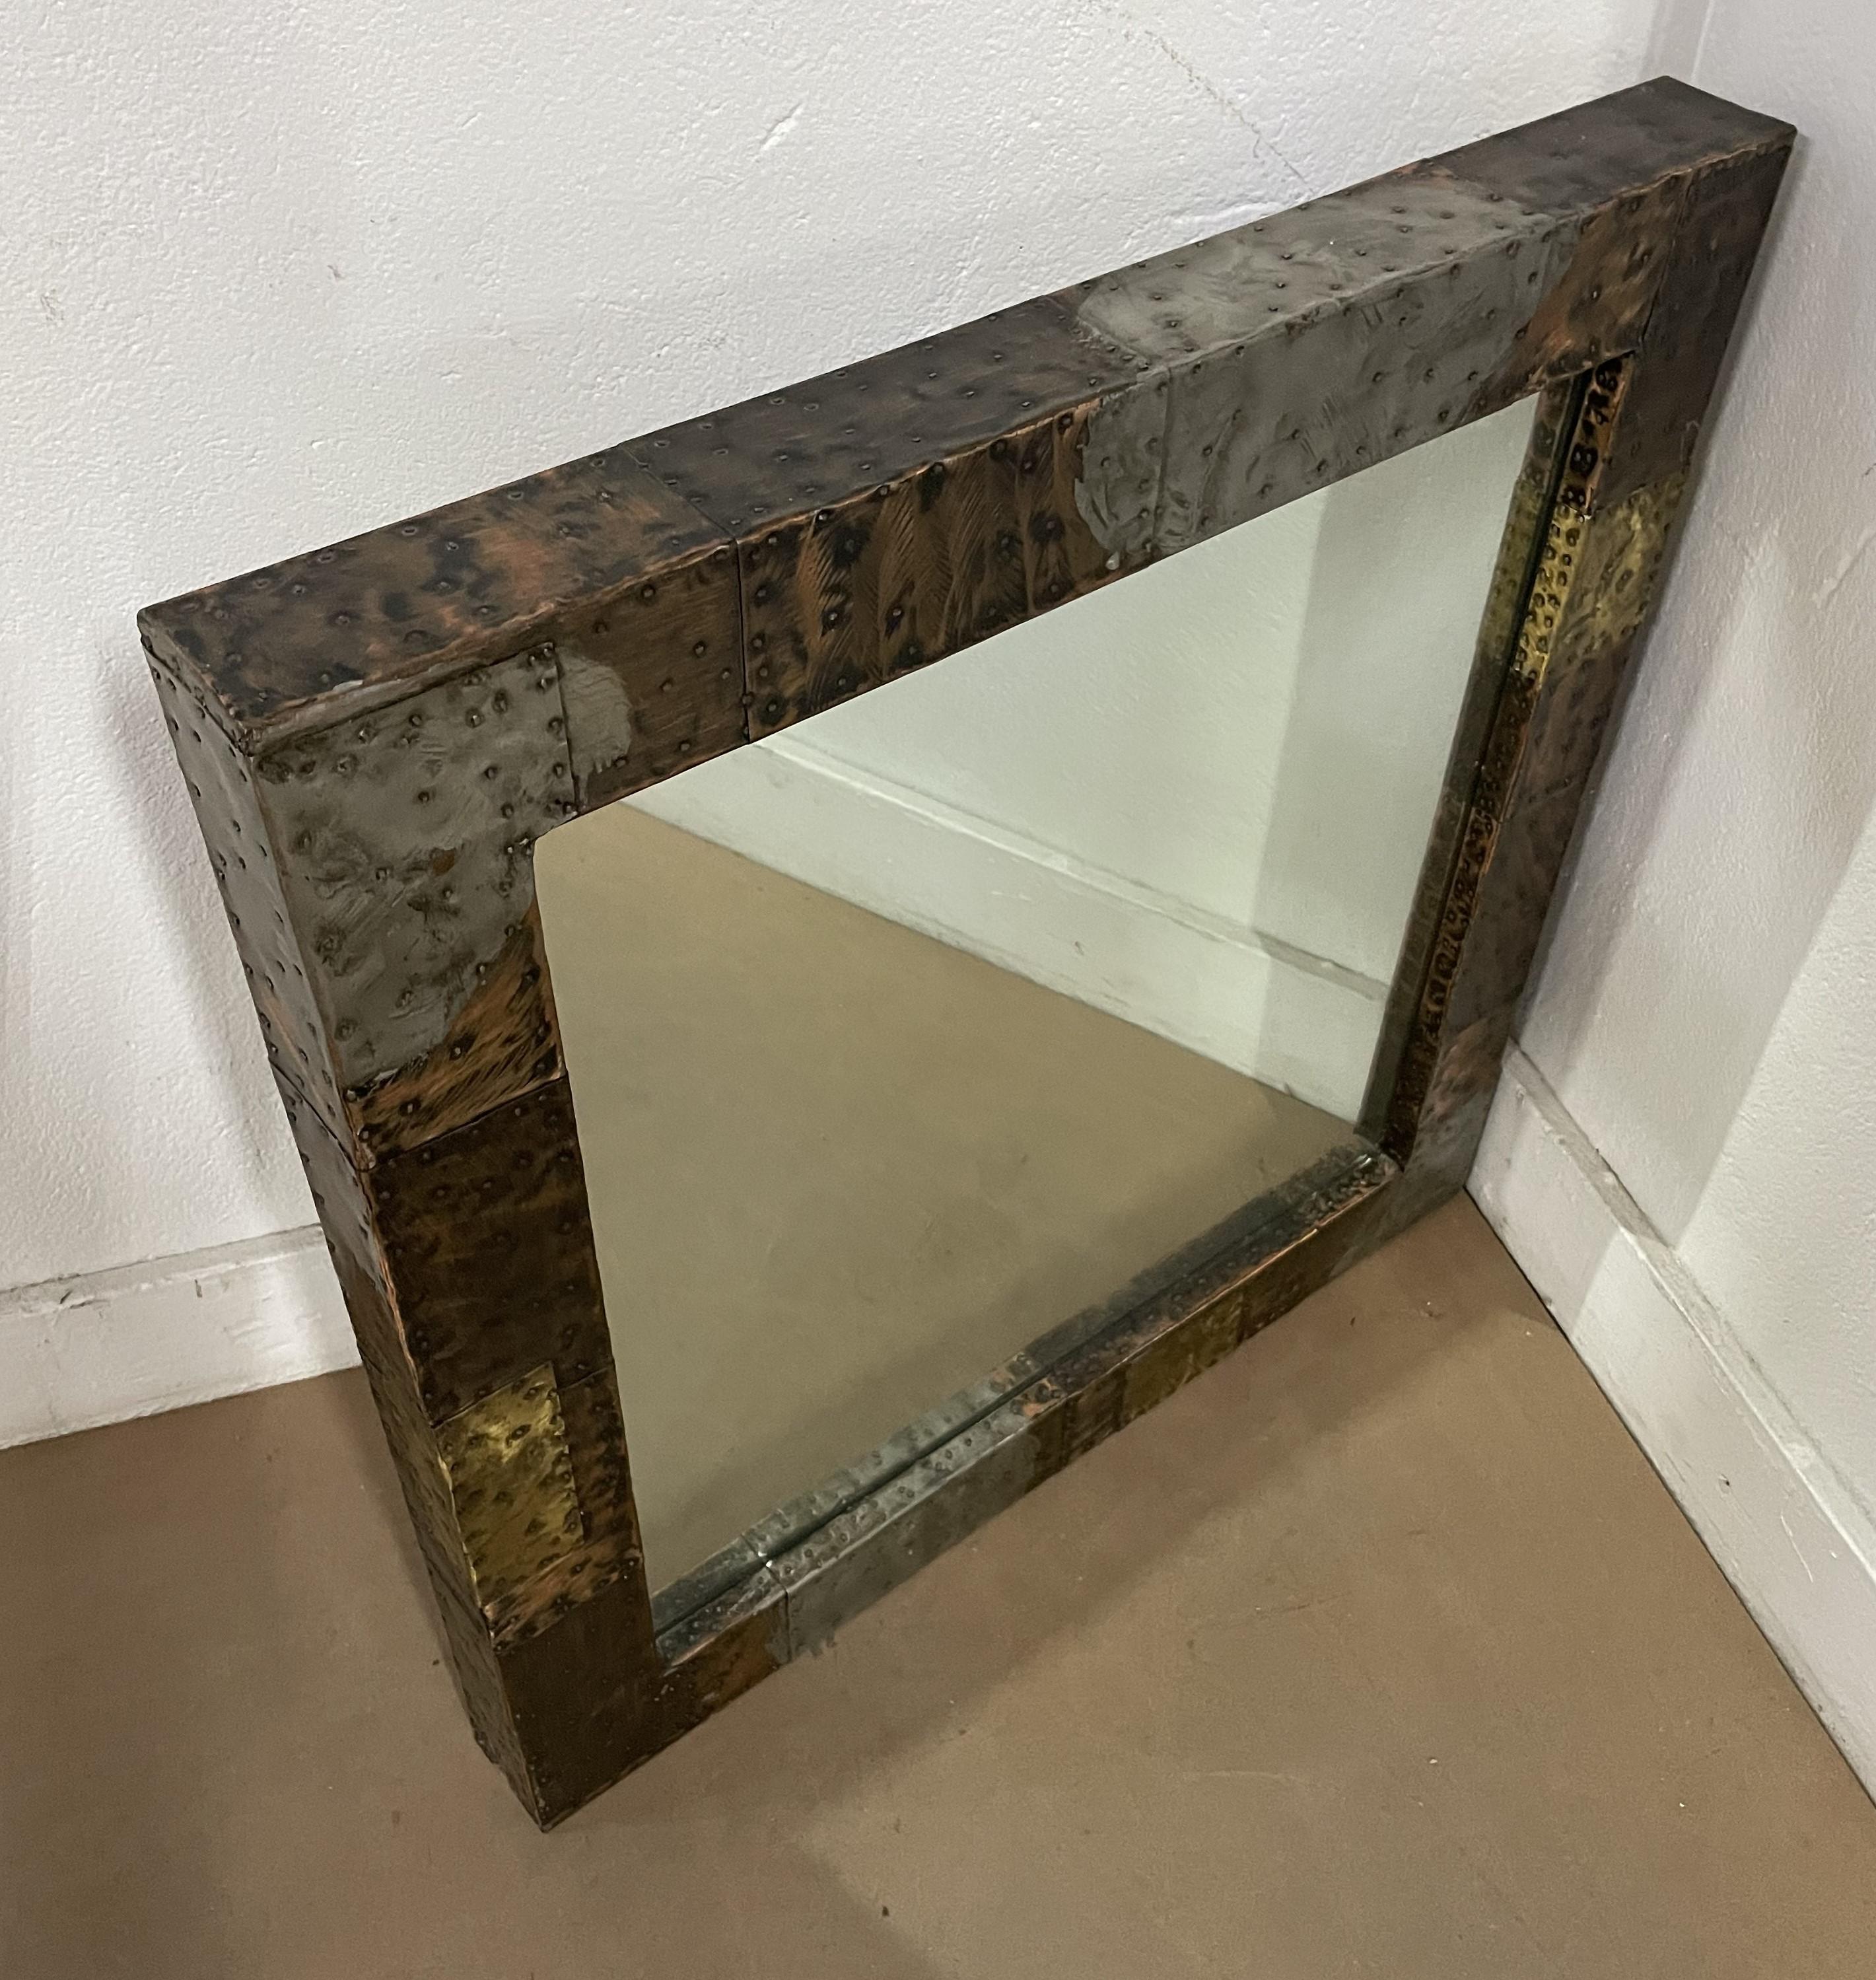 Vintage Paul Evans Patchwork mirror and matching shelf or console with slate top. 
Shelf measures: 6 x 42 x 13. Mirror measures: 30 x 30.